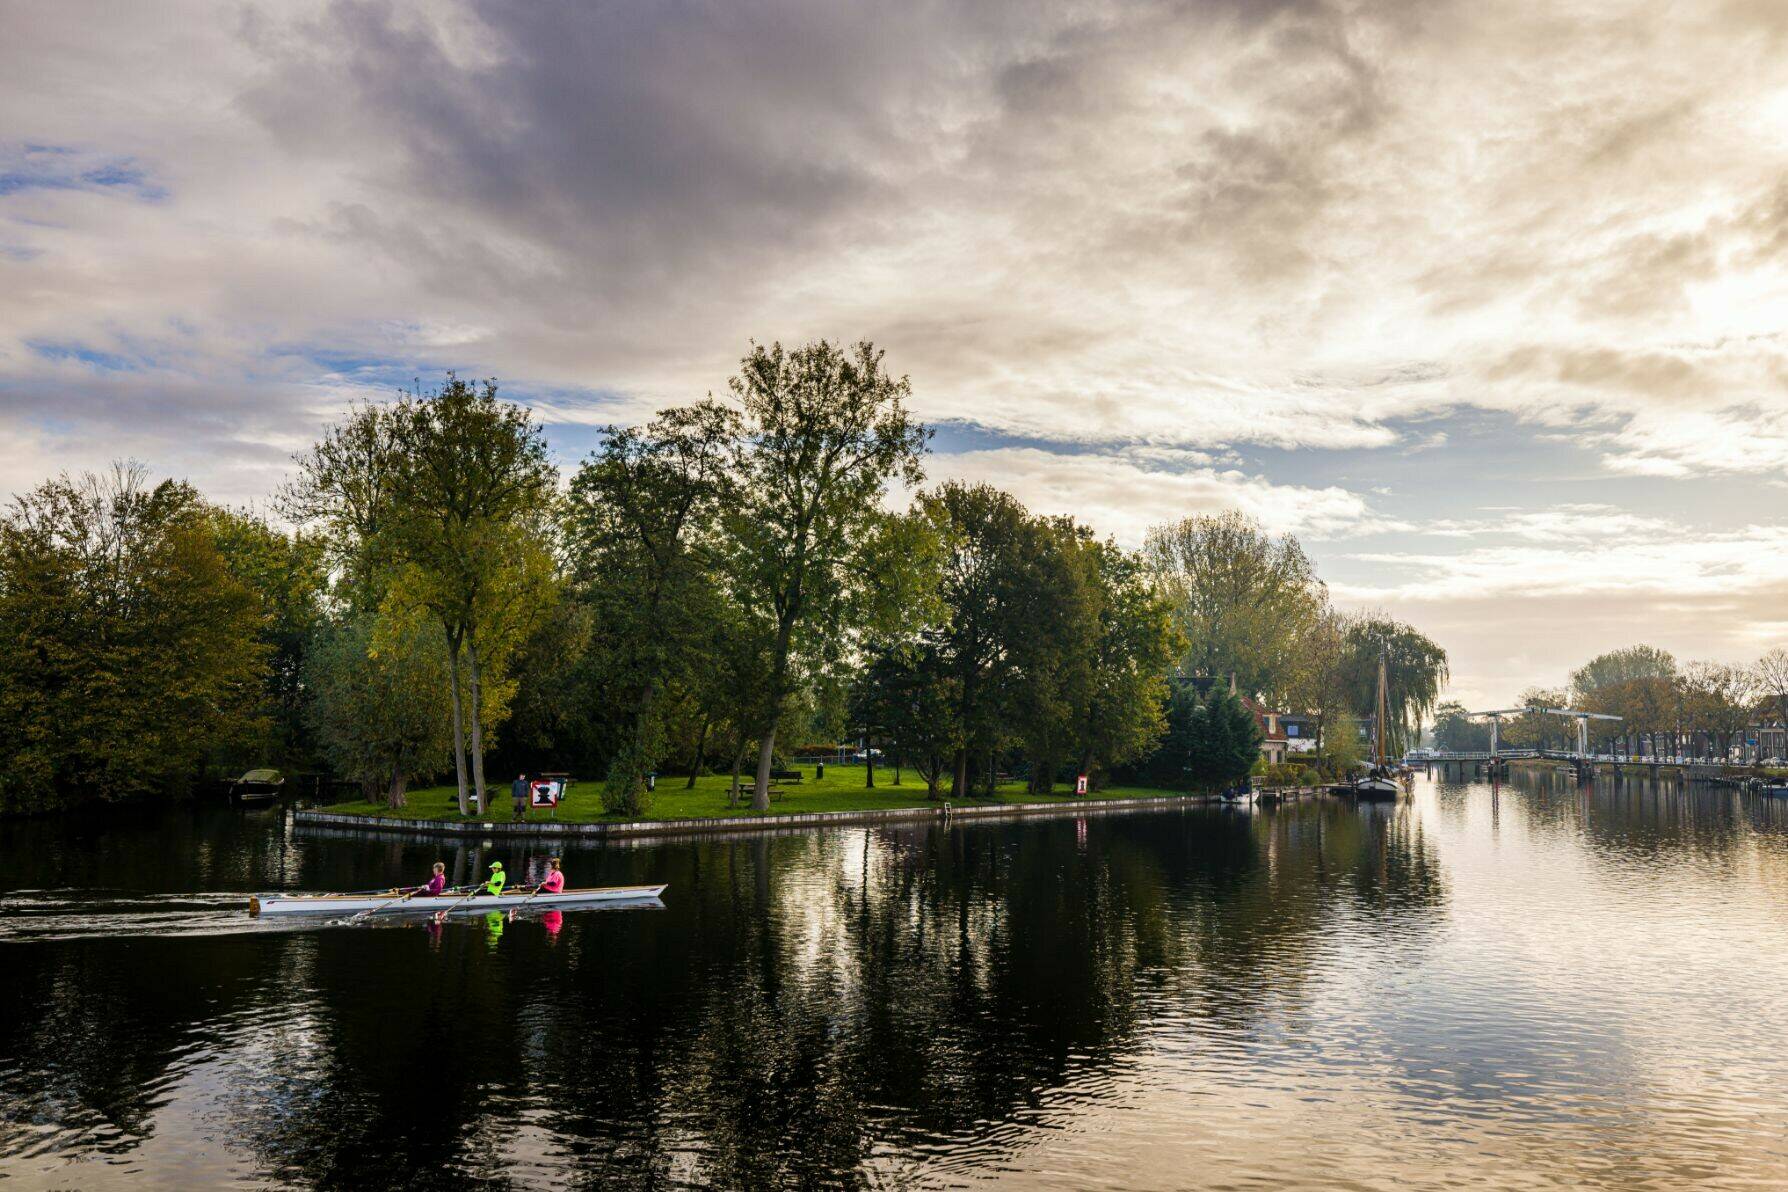 Rowers on the Vecht